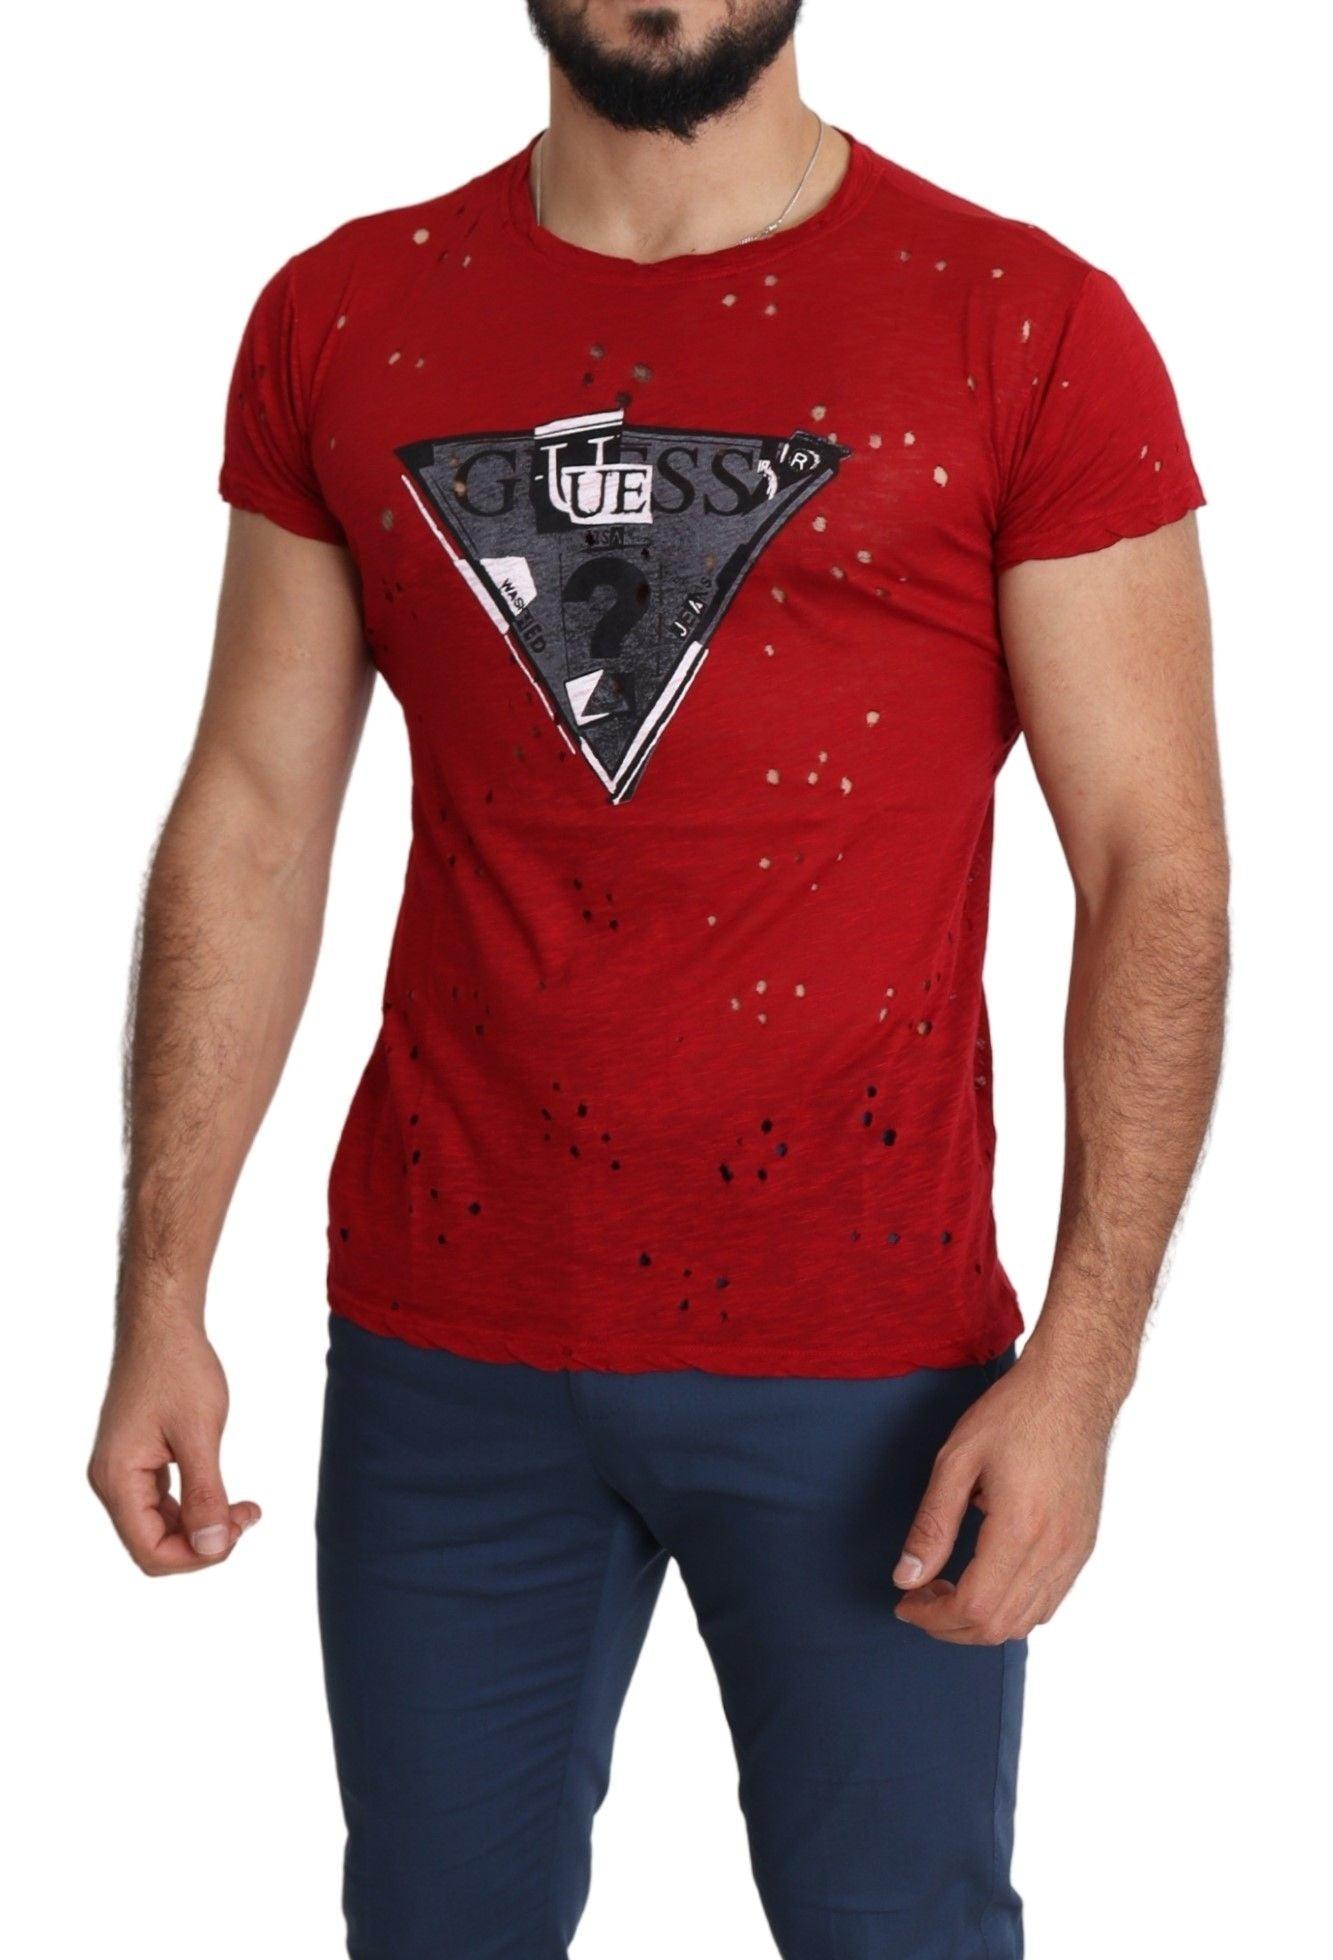 Guess Radiant Red Cotton Tee Perfect For Everyday Style - PER.FASHION